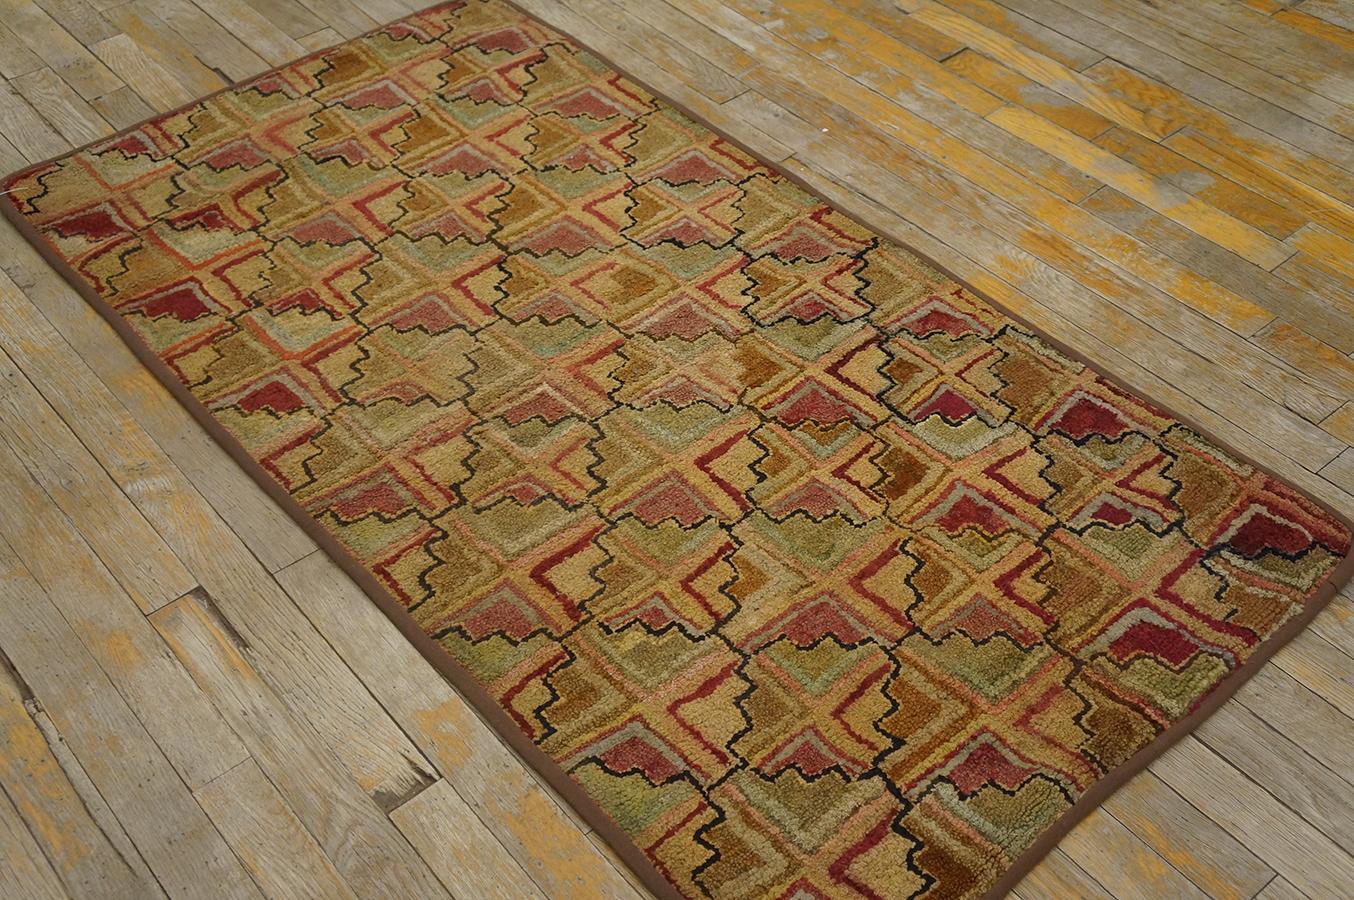 Antique hand-woven American Hooked rug. Green tone base multi color geometric pattern brown border. Well maintained circa 1910
Early 20th Century American Hooked Rug  (2' 7'' x 5' - 78 x 152 cm )